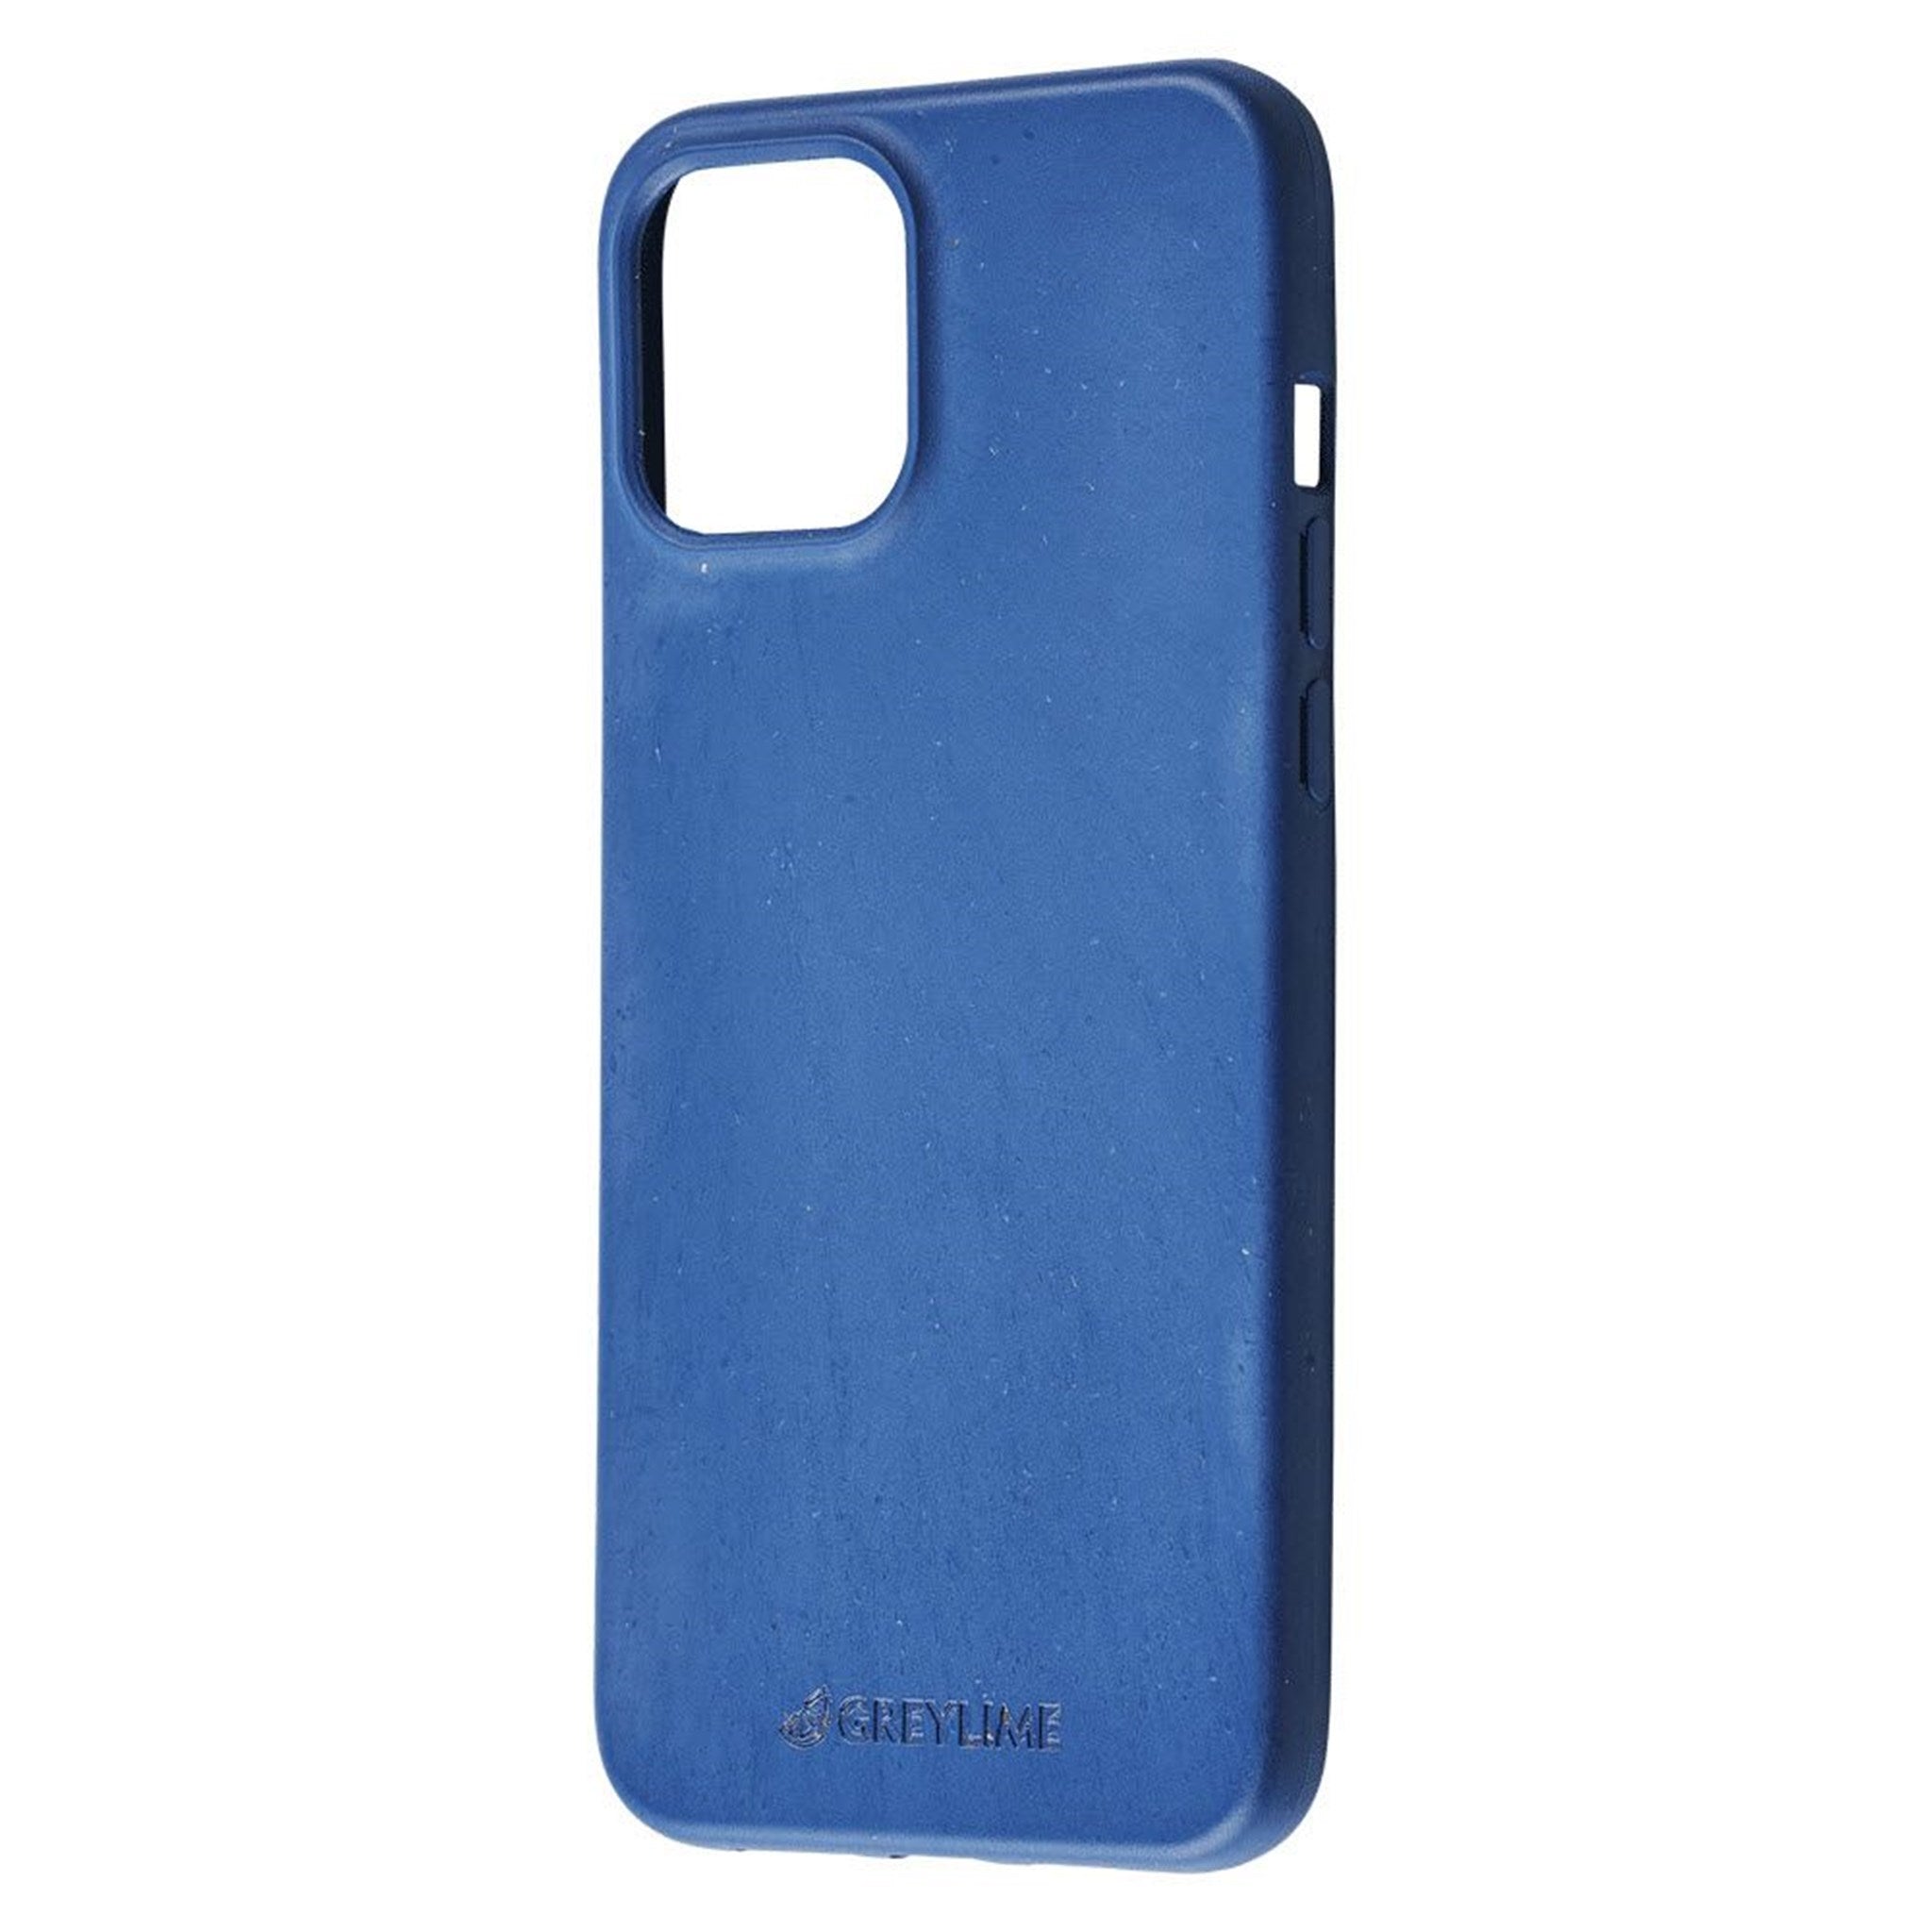 GreyLime-iPhone-12-Pro-Max-Biodegdrable-Cover-Navy-Blue-COIP12L03-V2.jpg